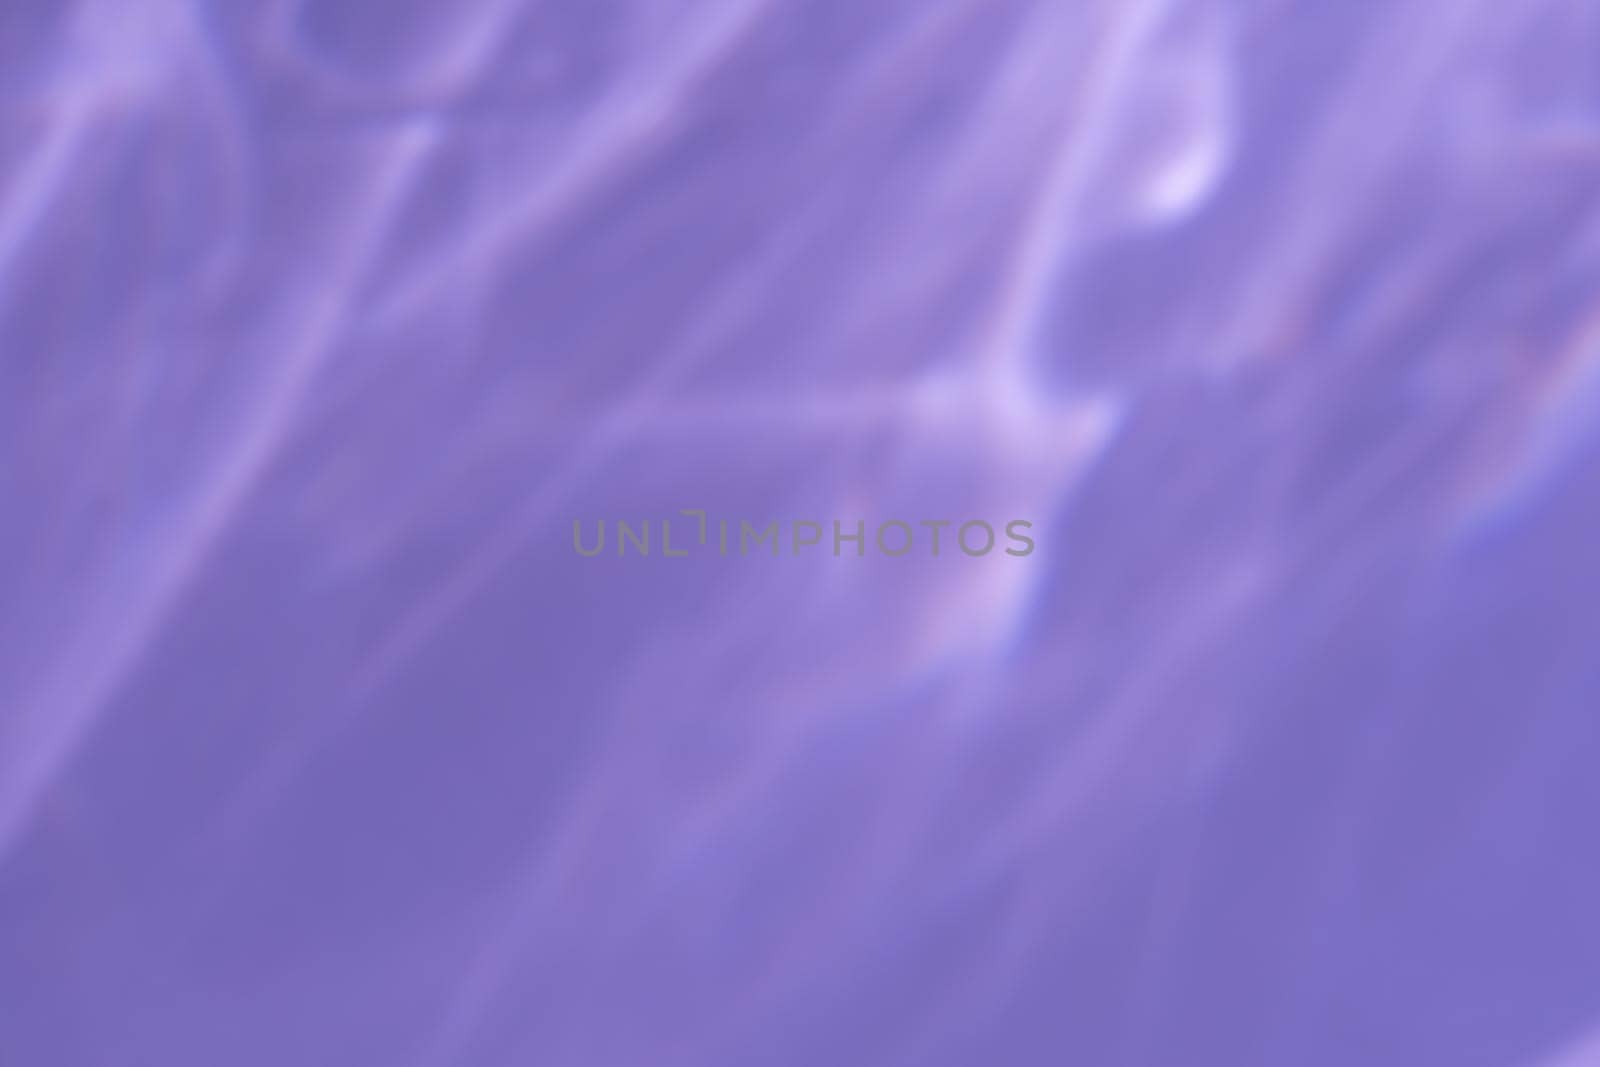 Caustic effect light refraction on lilac wall overlay photo mockup, blurred sun rays refracting through glass prism with shadow. Abstract natural light refraction silhouette on water surface. by photolime